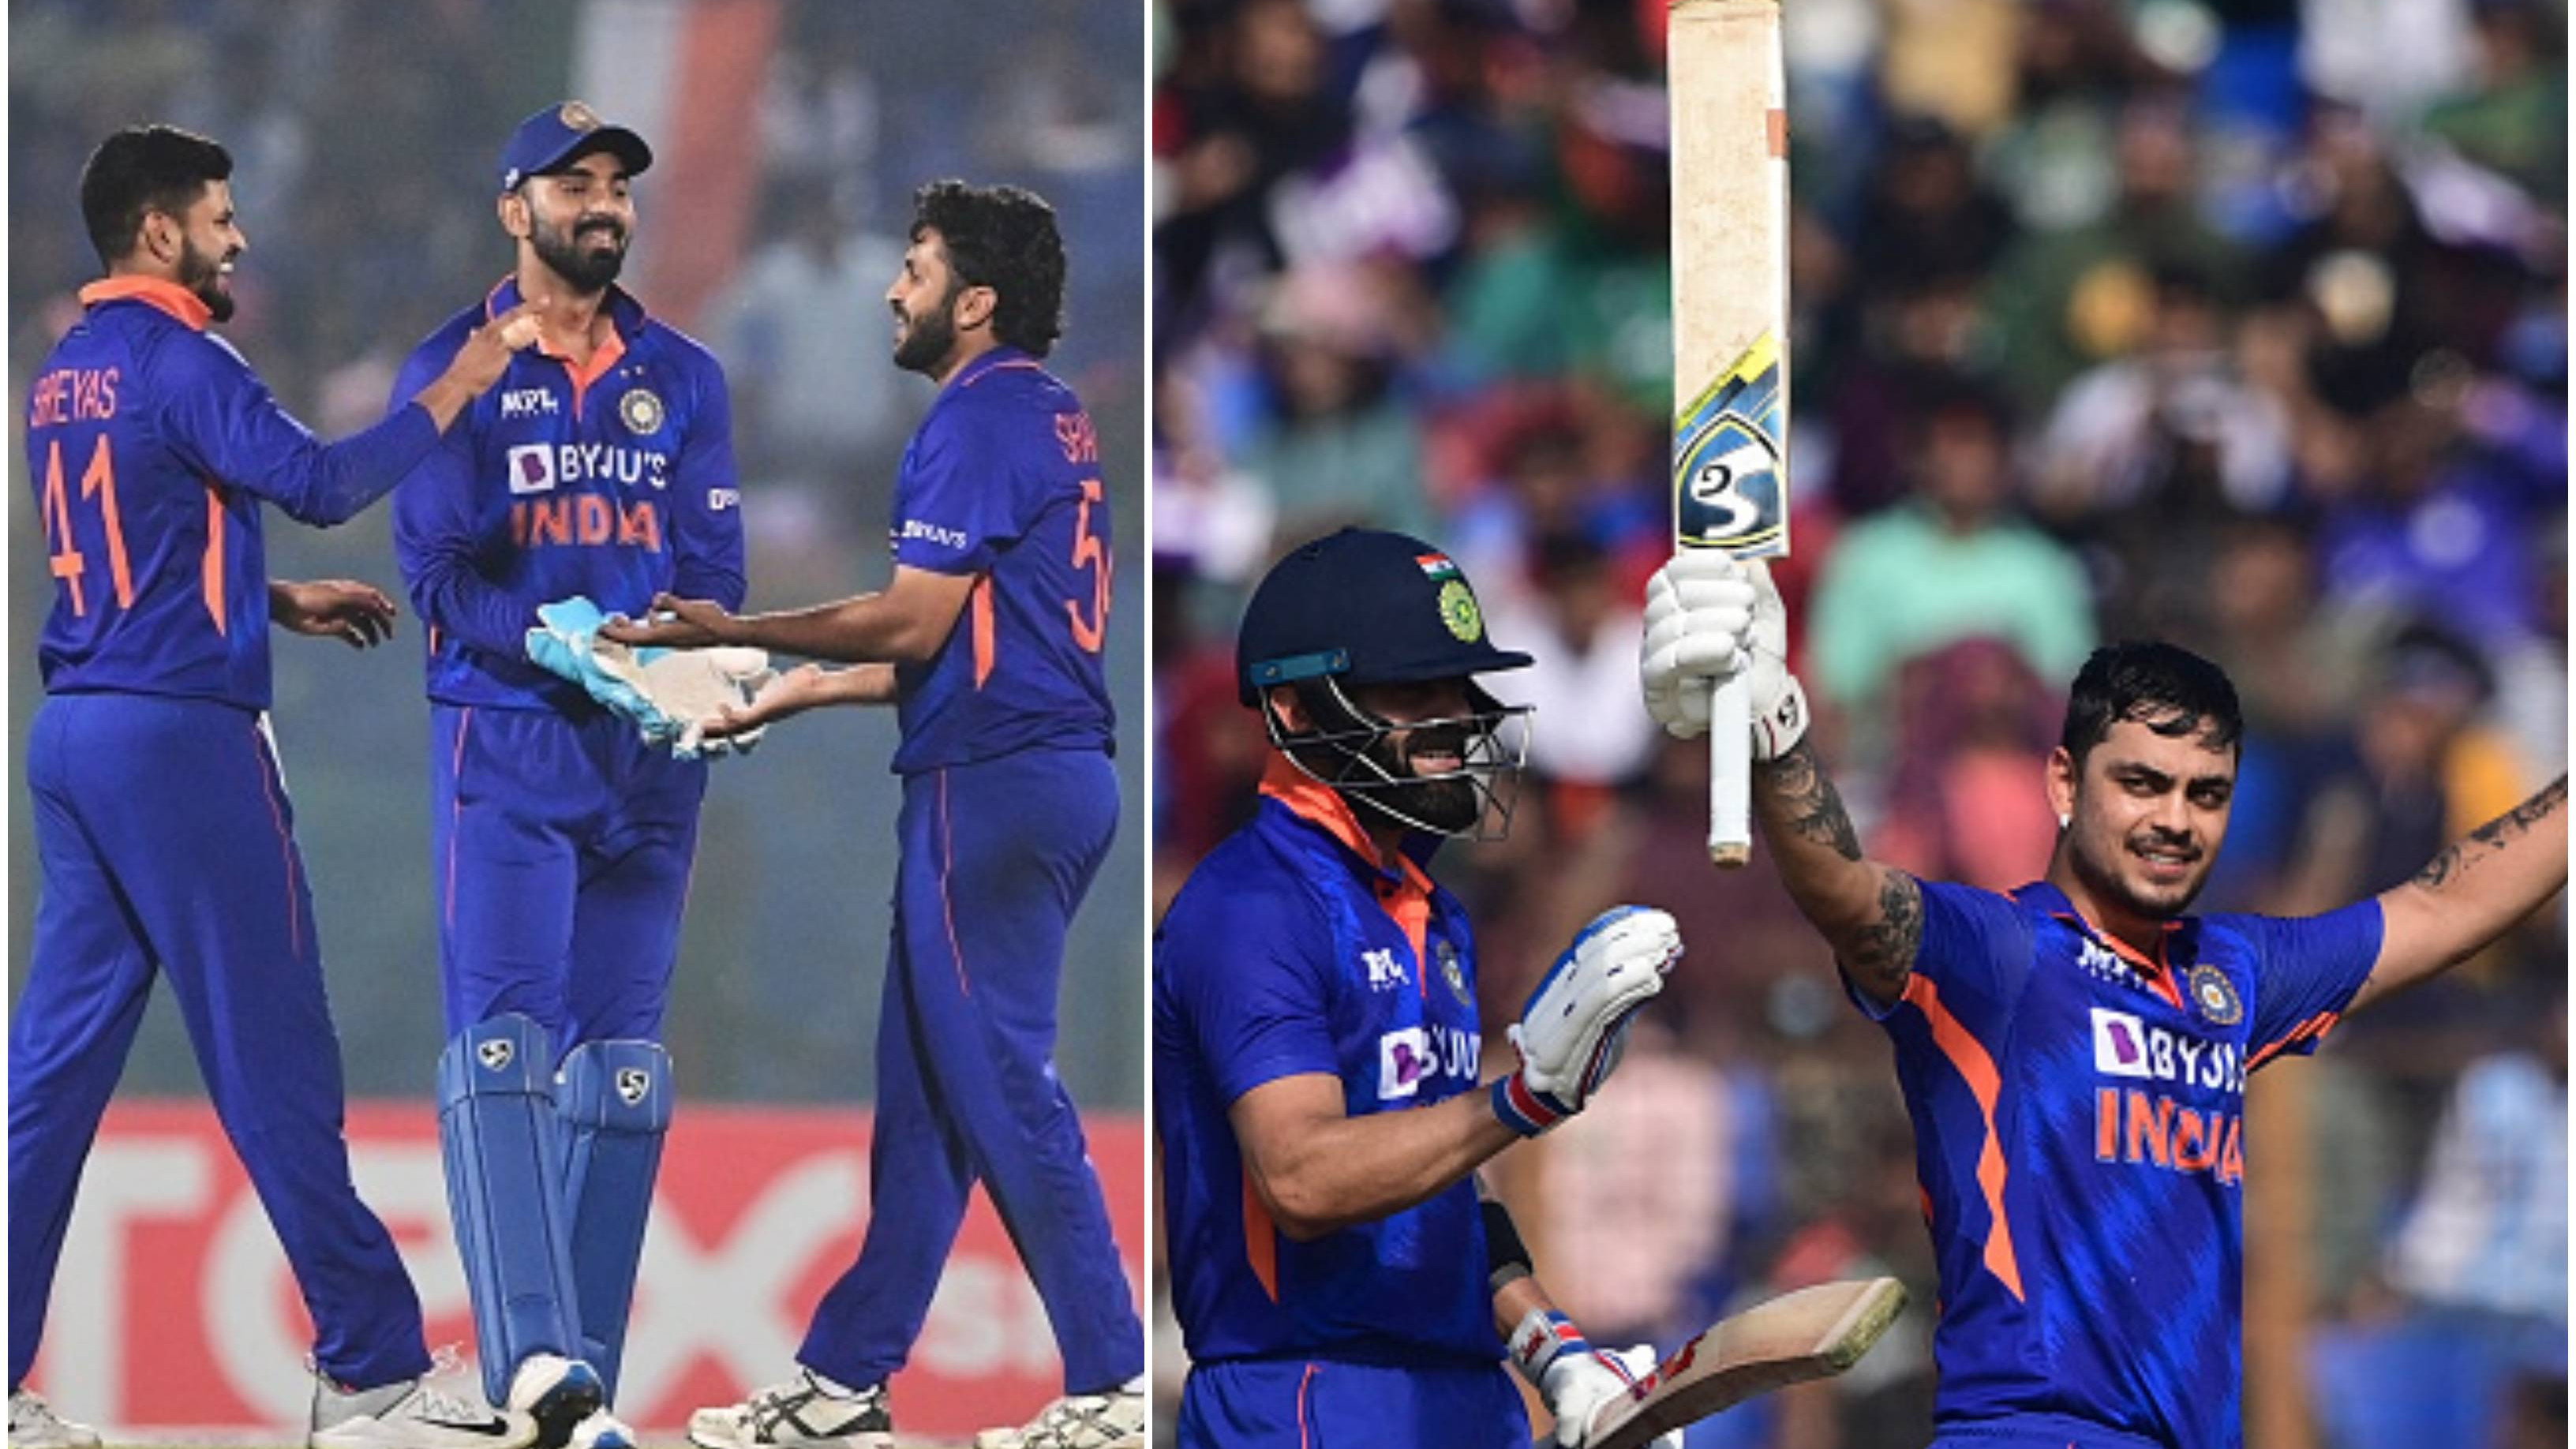 BAN v IND 2022: “He grabbed the opportunity with both hands,” KL Rahul hails Ishan Kishan for his breathtaking 210 in 3rd ODI